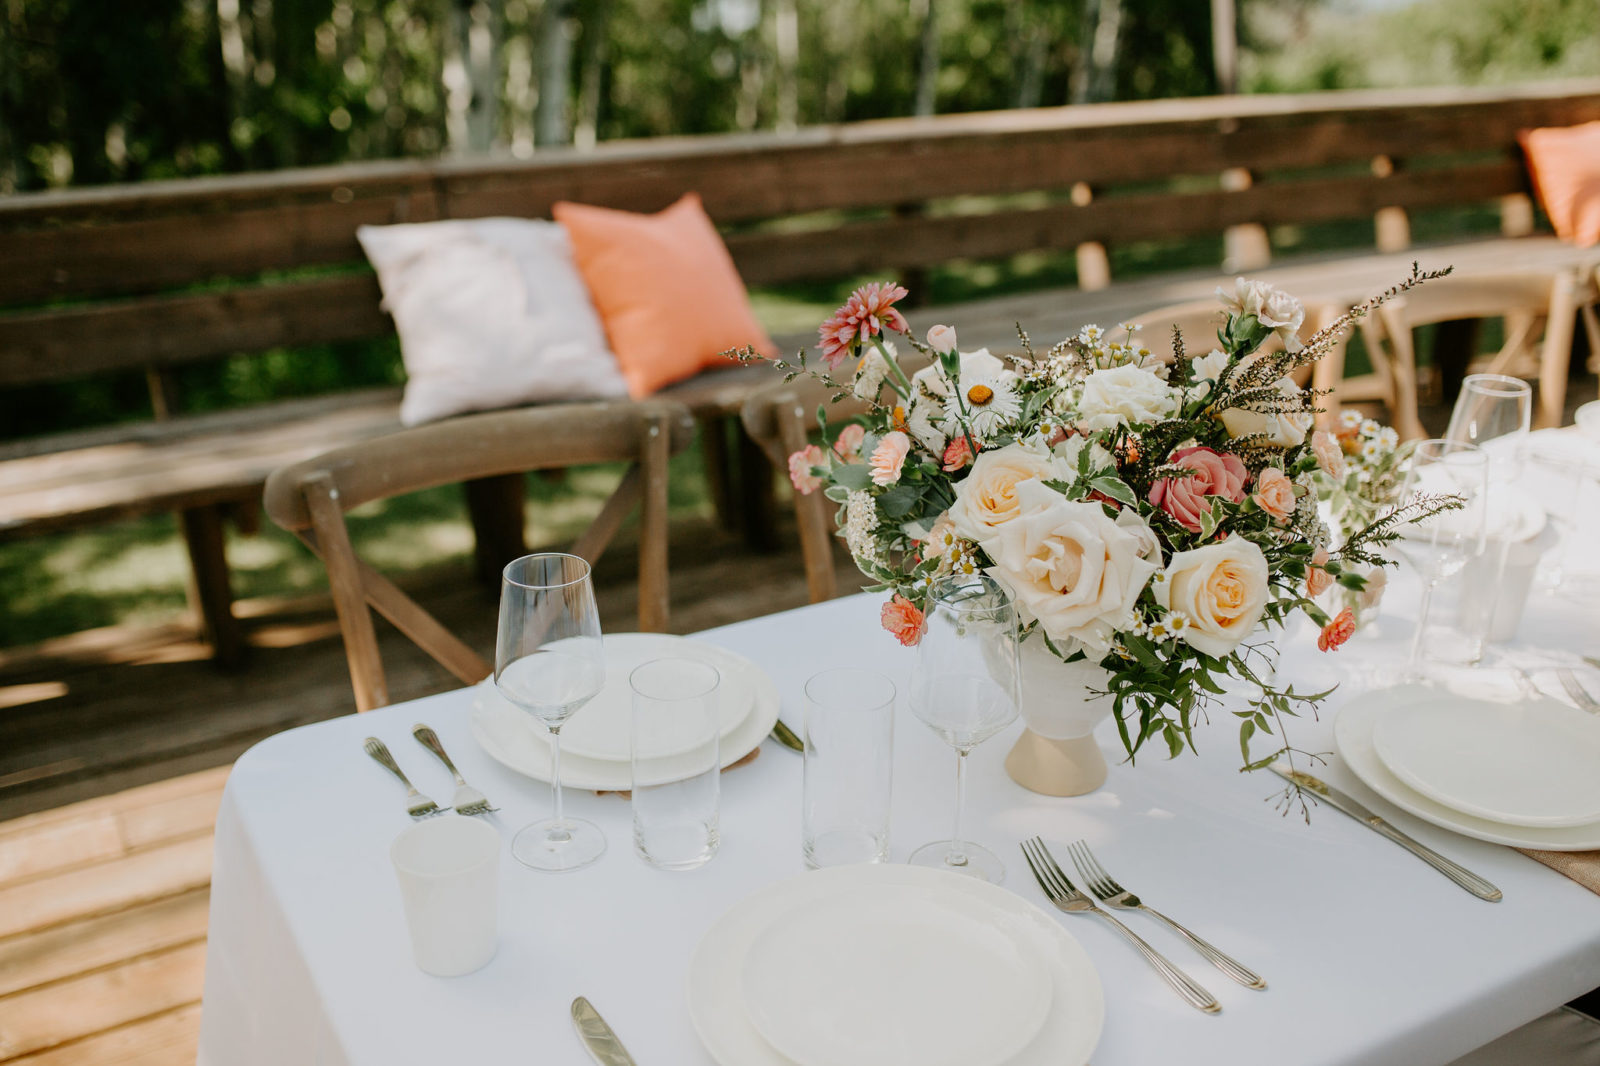 Patio Dinner Party at The Glenmore Sailing Club - Calgary Wedding featured on Bronte Bride